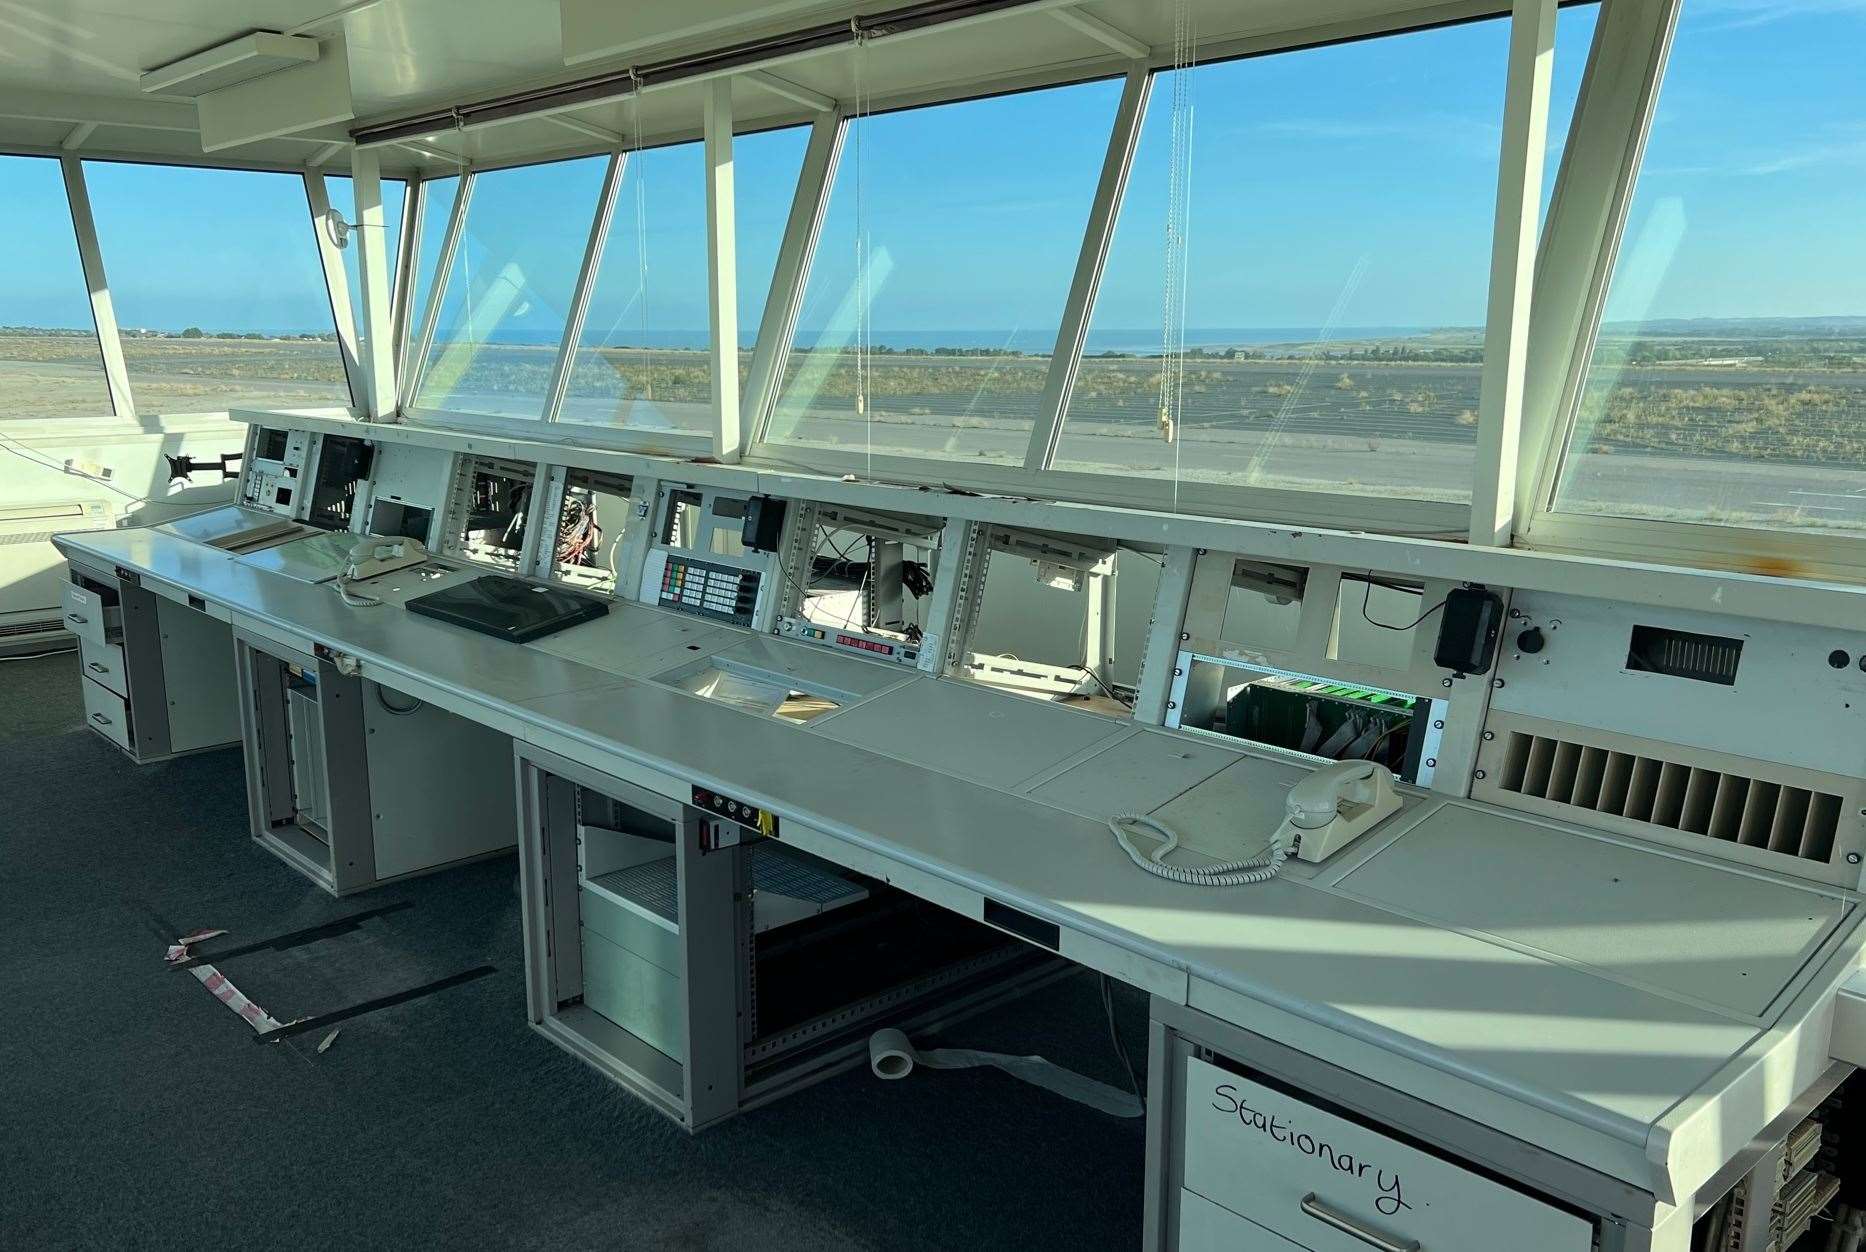 Inside the control tower as it looks today